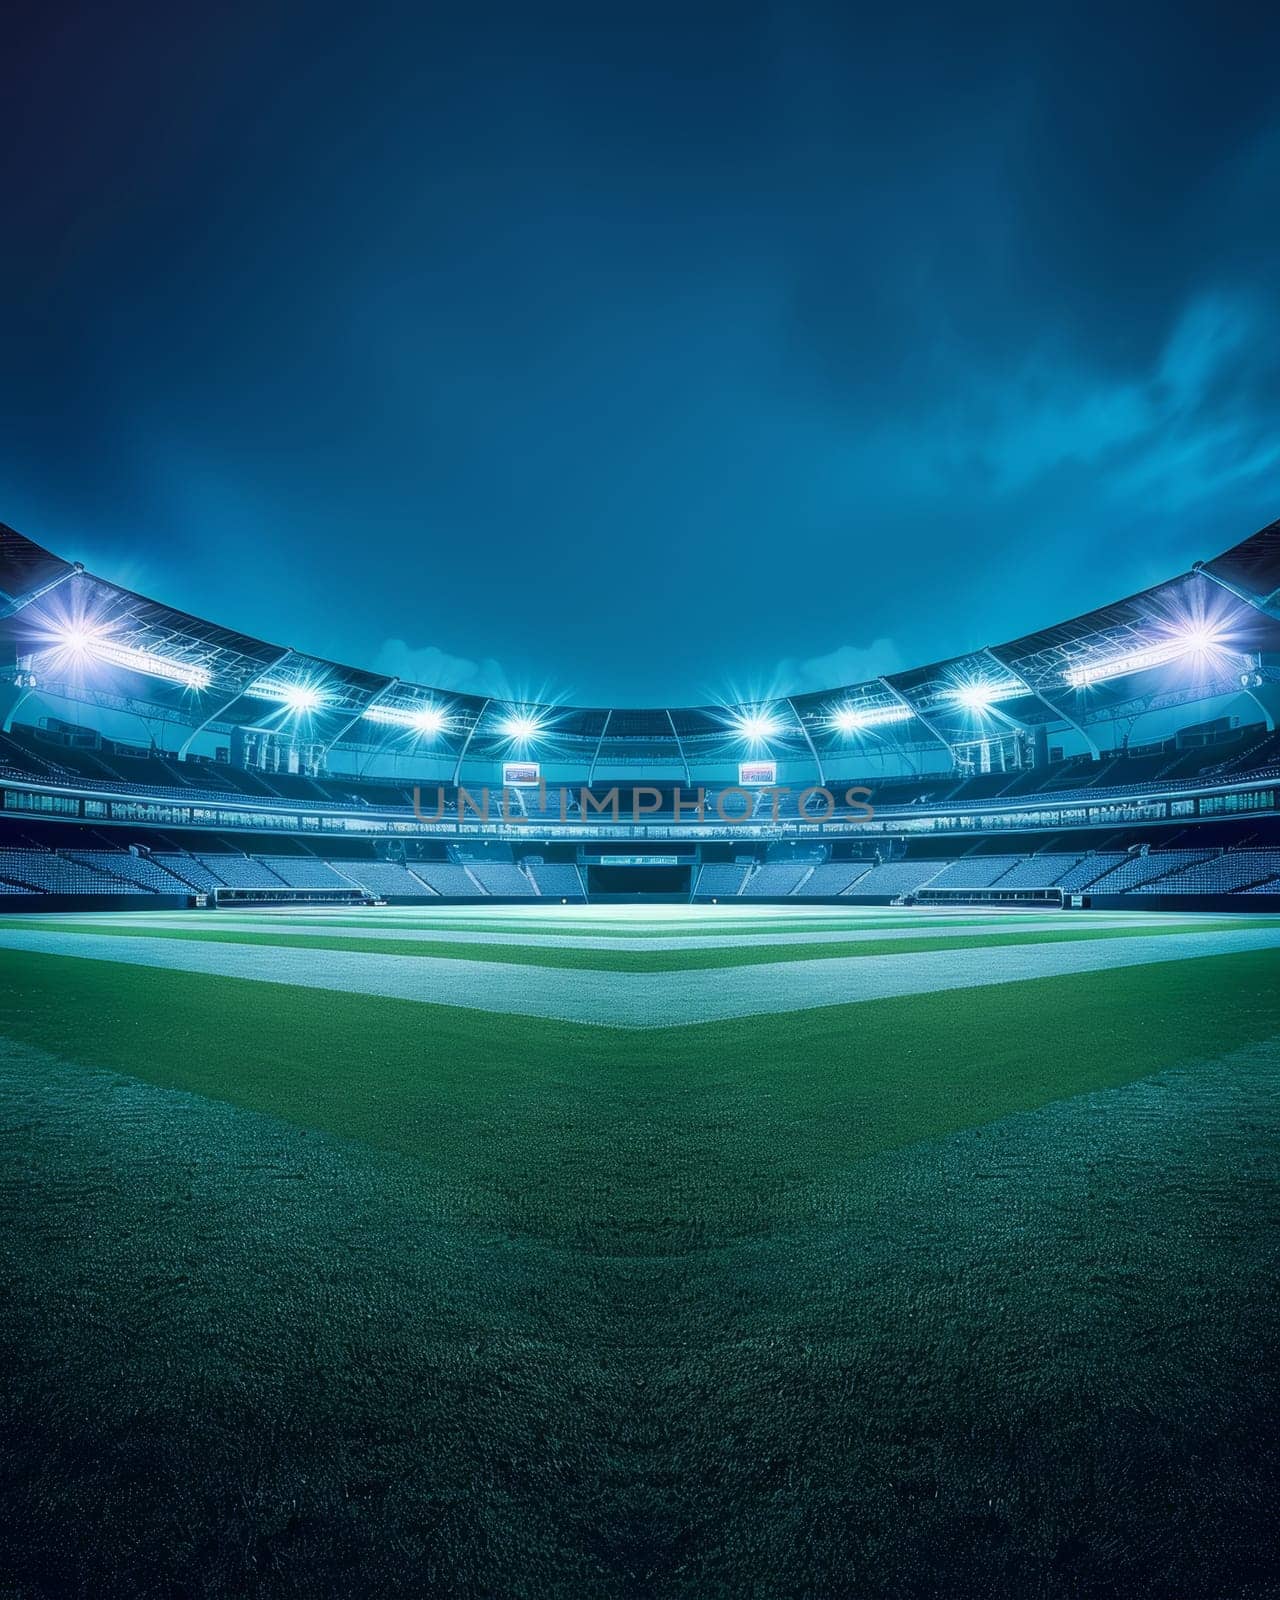 Illuminated, empty stadium at night with lush green field and bright floodlights by sfinks